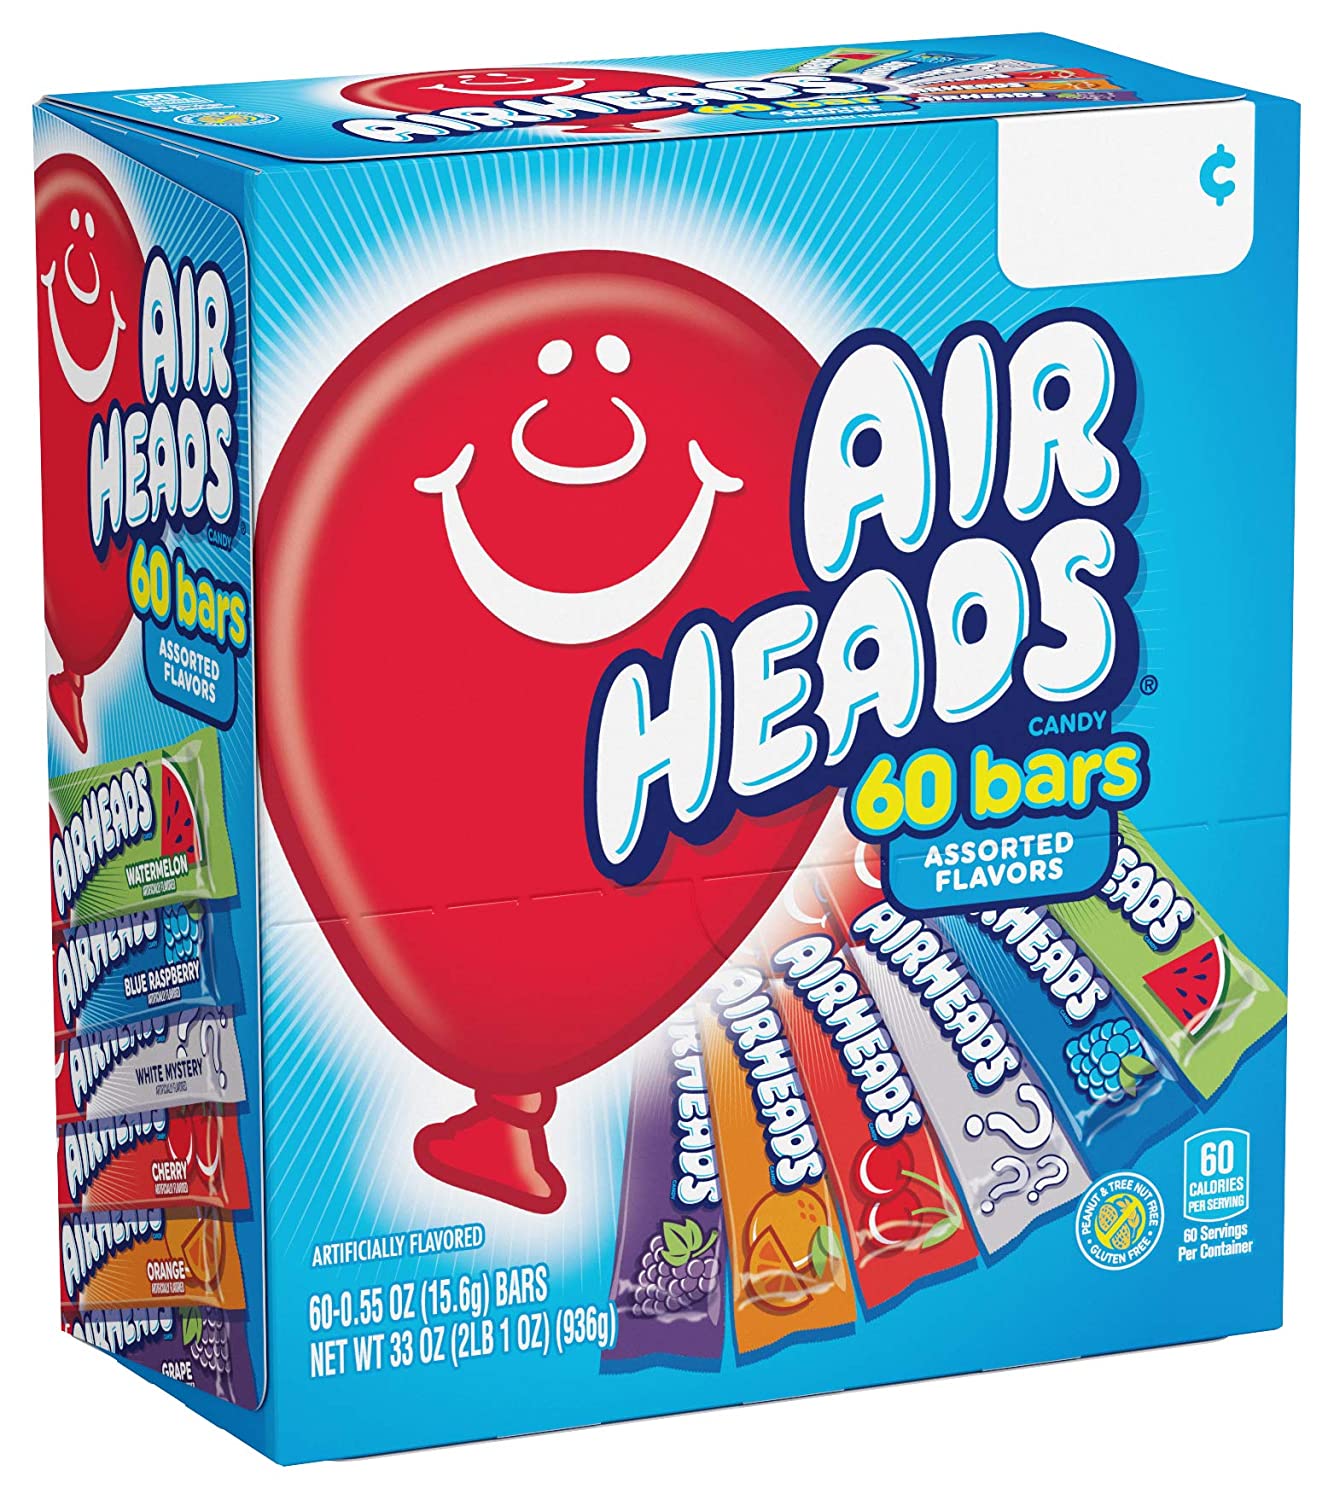 Airheads Candy, Variety Box, Chewy Full Size 60 Count  $6.38 amazon